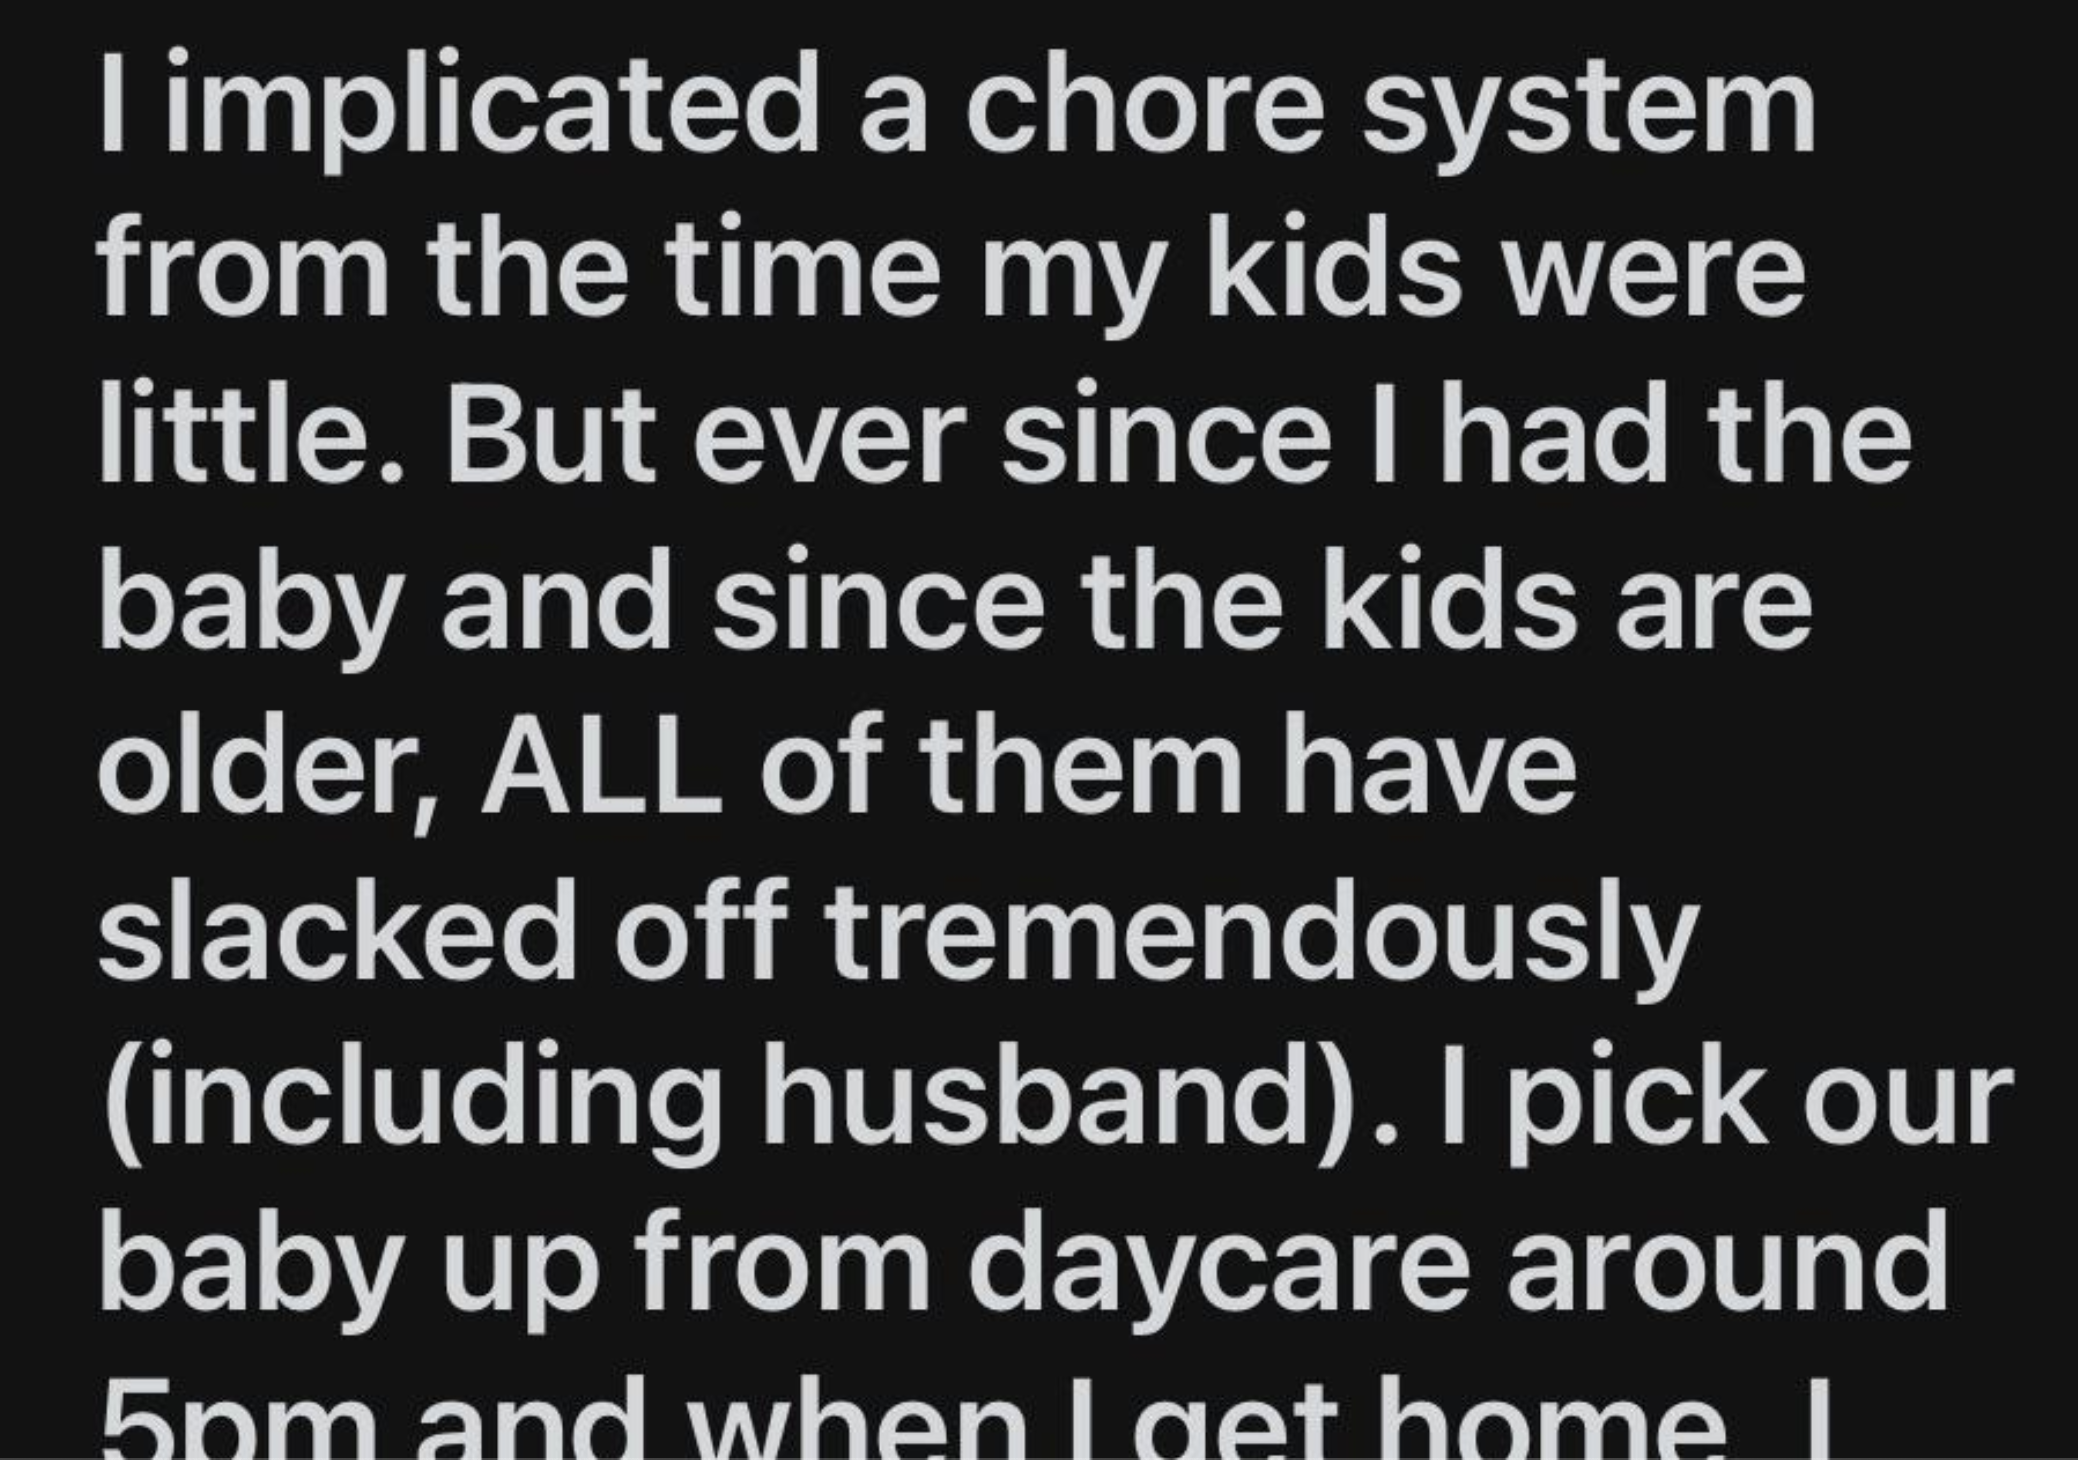 I implicated a chore system from the time my kids were little. But ever since I had the baby and since the kids are older, All of them have slacked off tremendously including husband. I pick our baby up from daycare around 5pm and when Laet home l